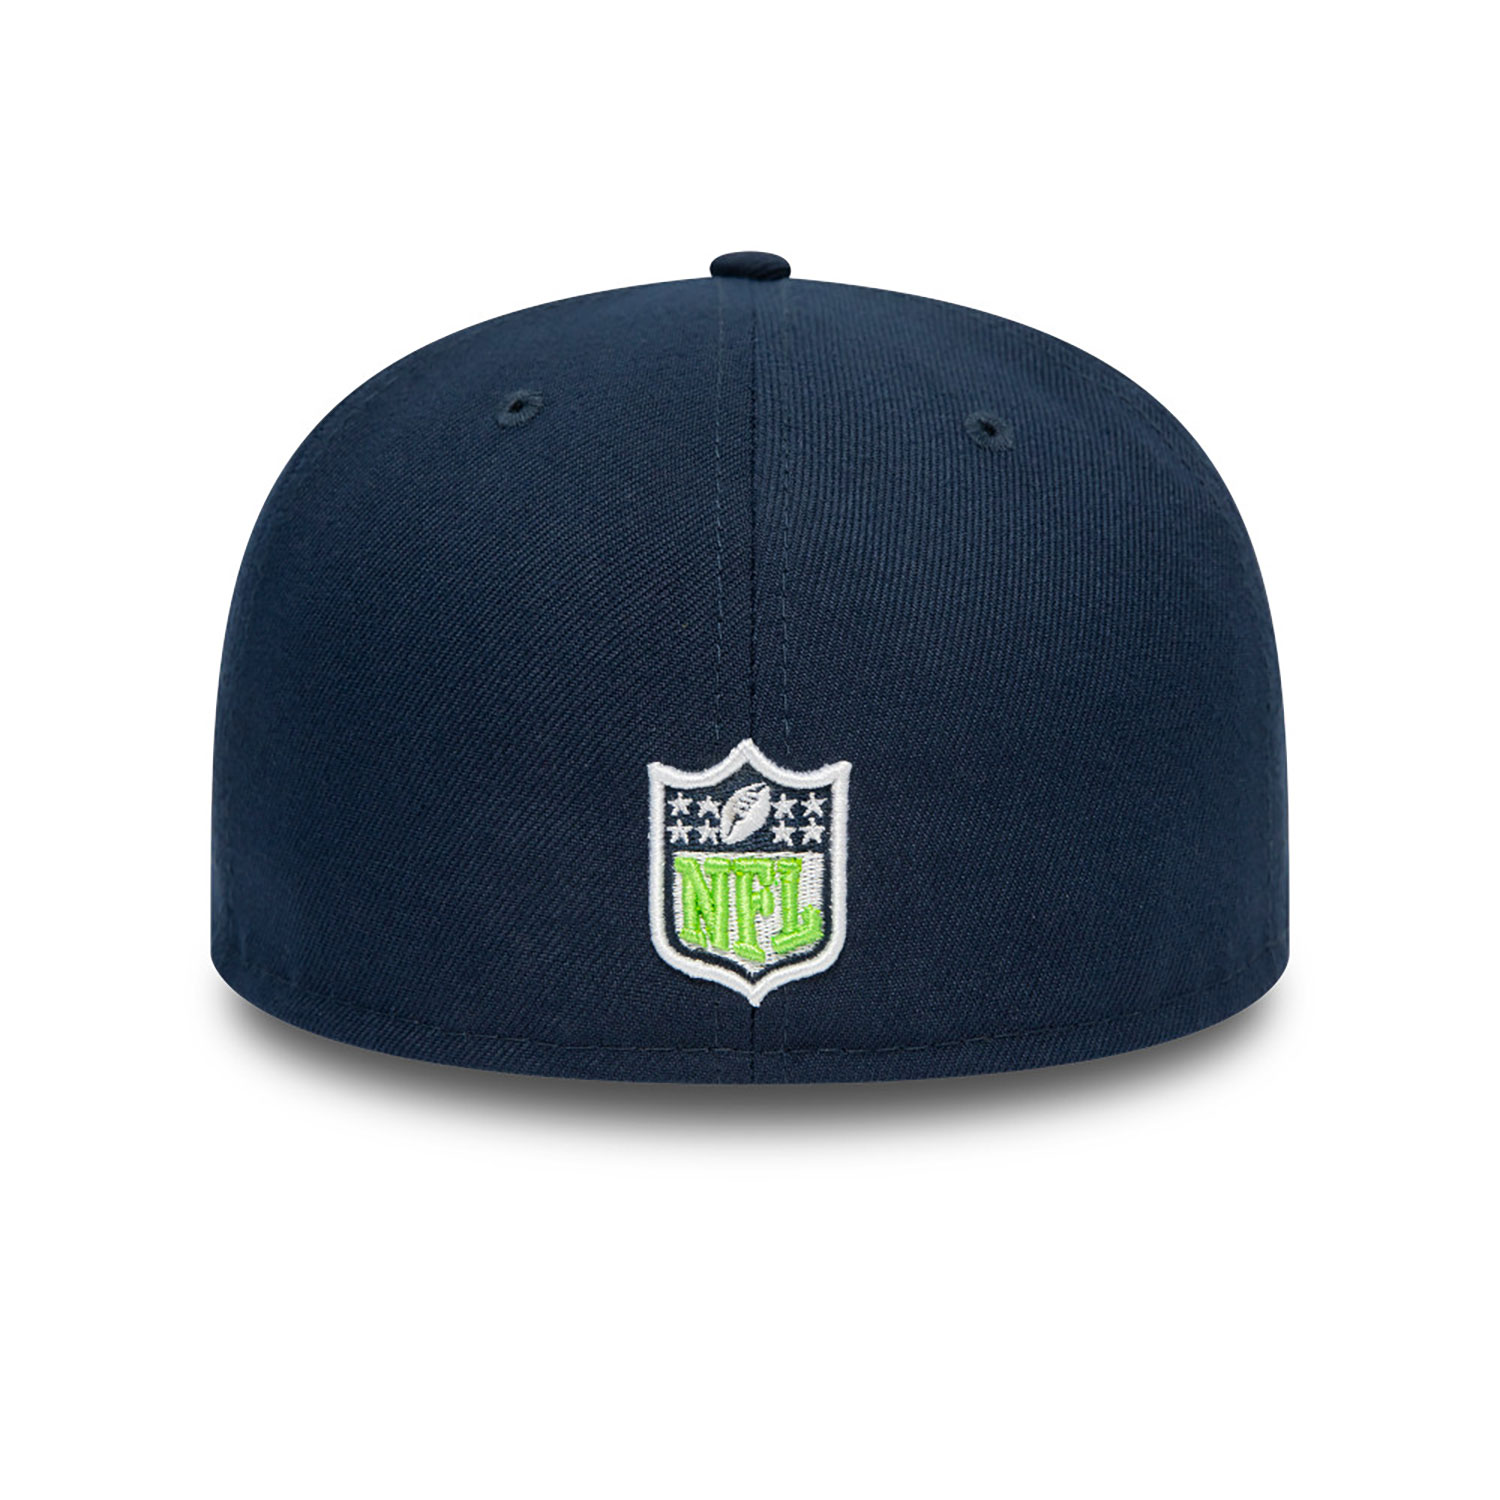 Seattle Seahawks NFL Variety Dark Blue 59FIFTY Fitted Cap